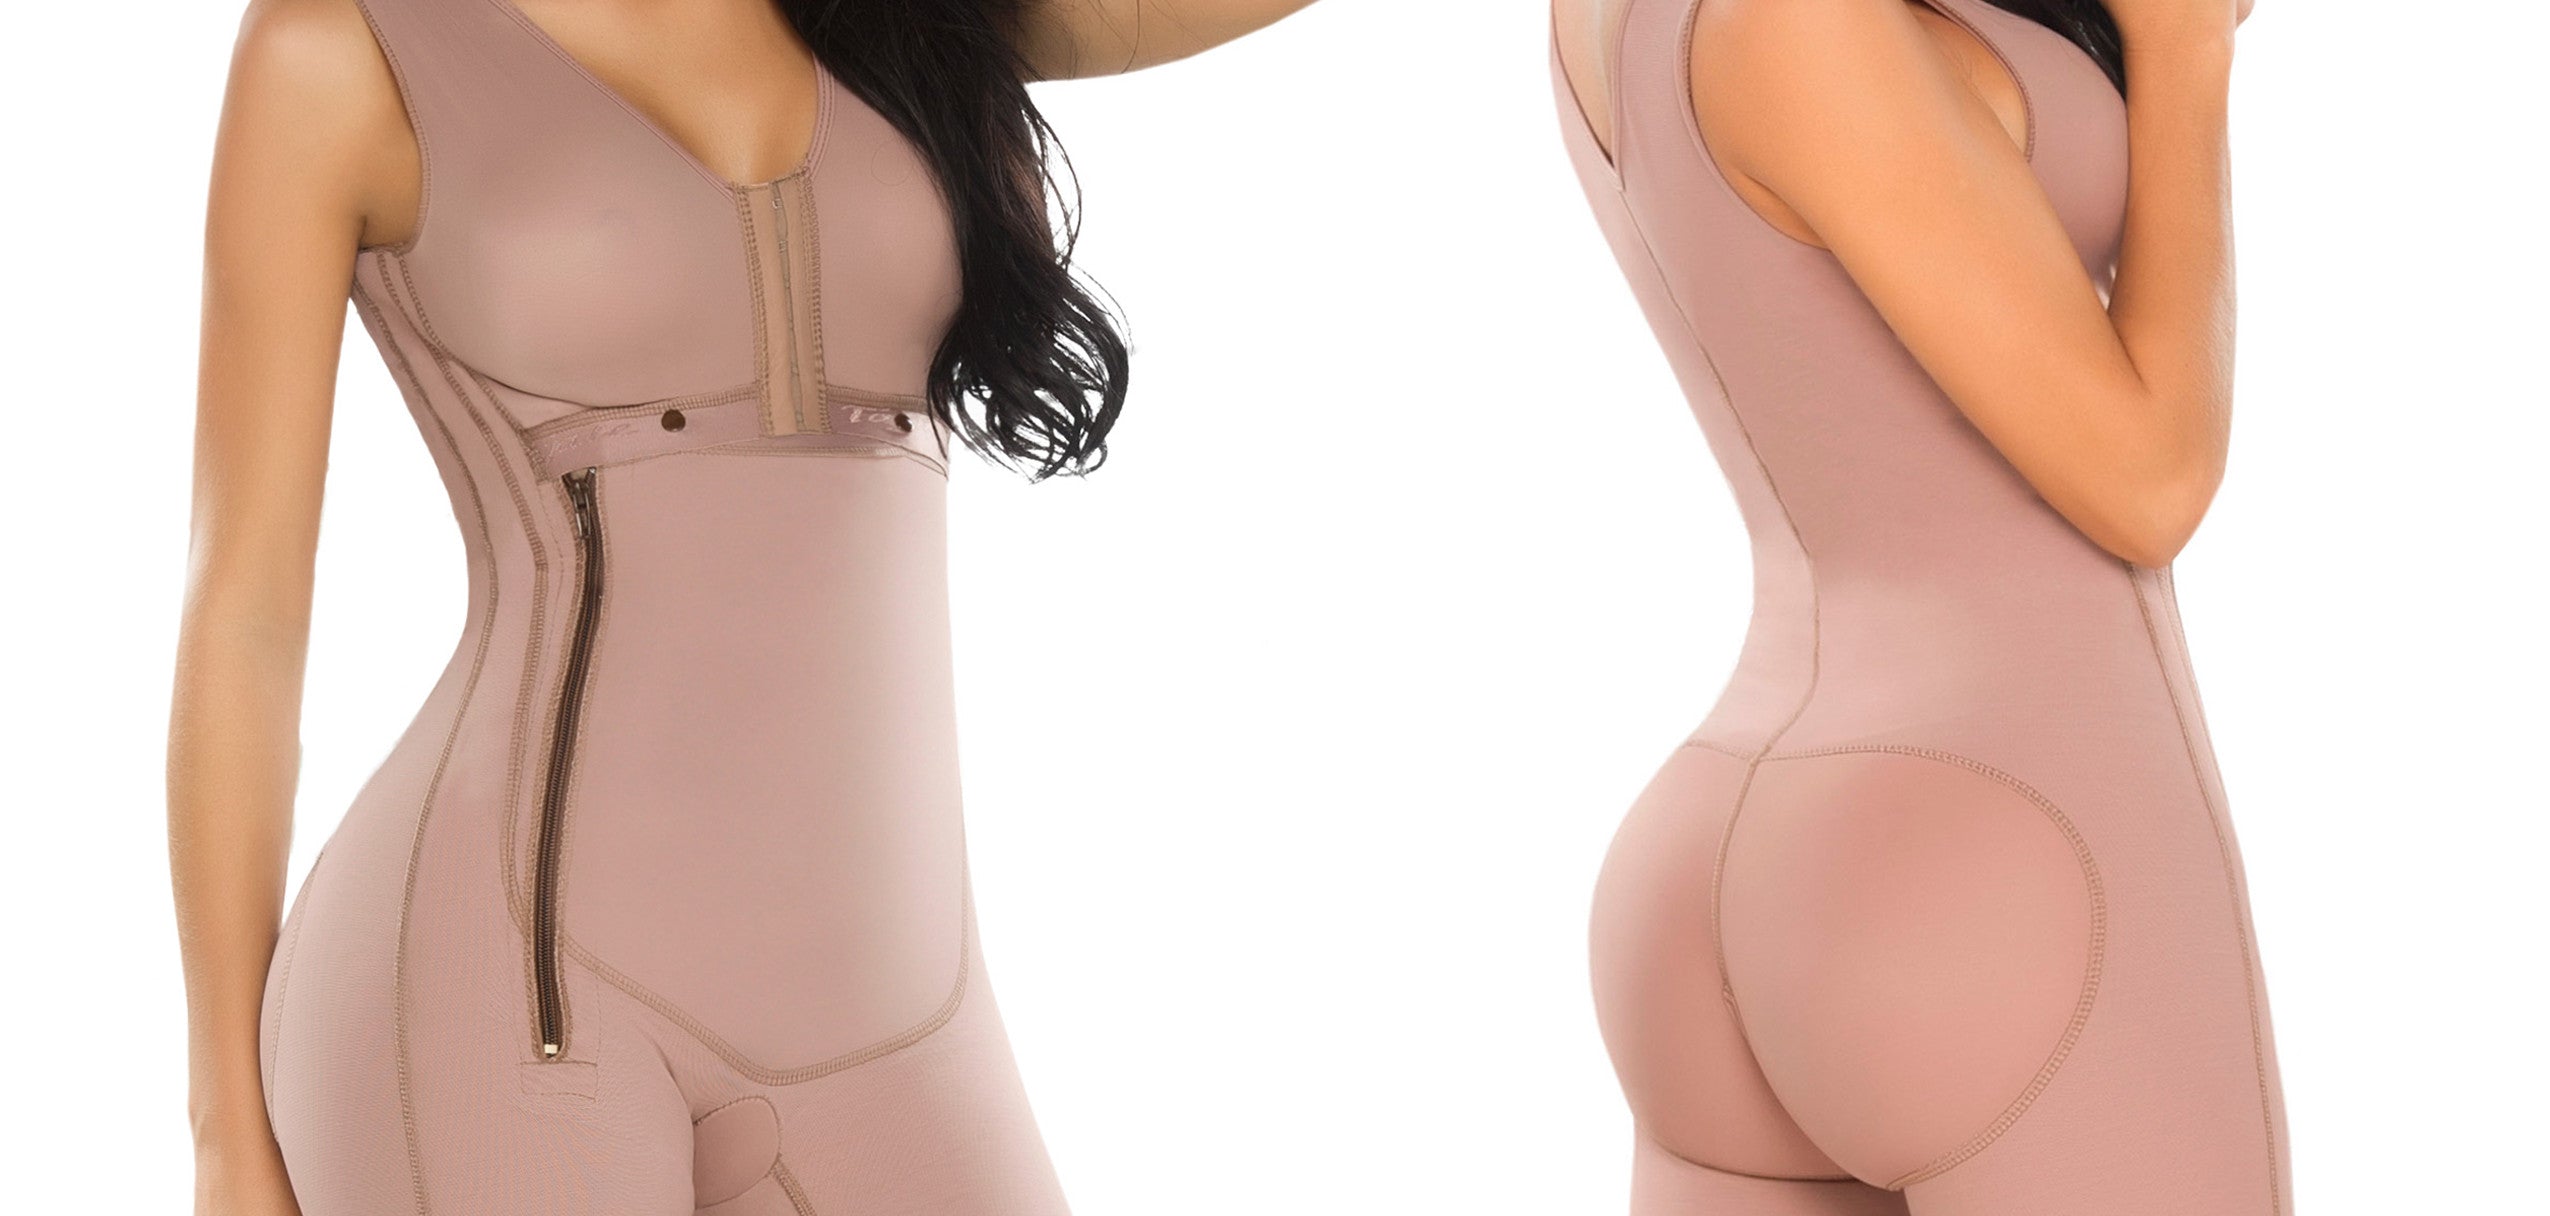 How Can Fajas Colombianas Post Surgical Undergarments Help You? – Shapes  Secrets Fajas